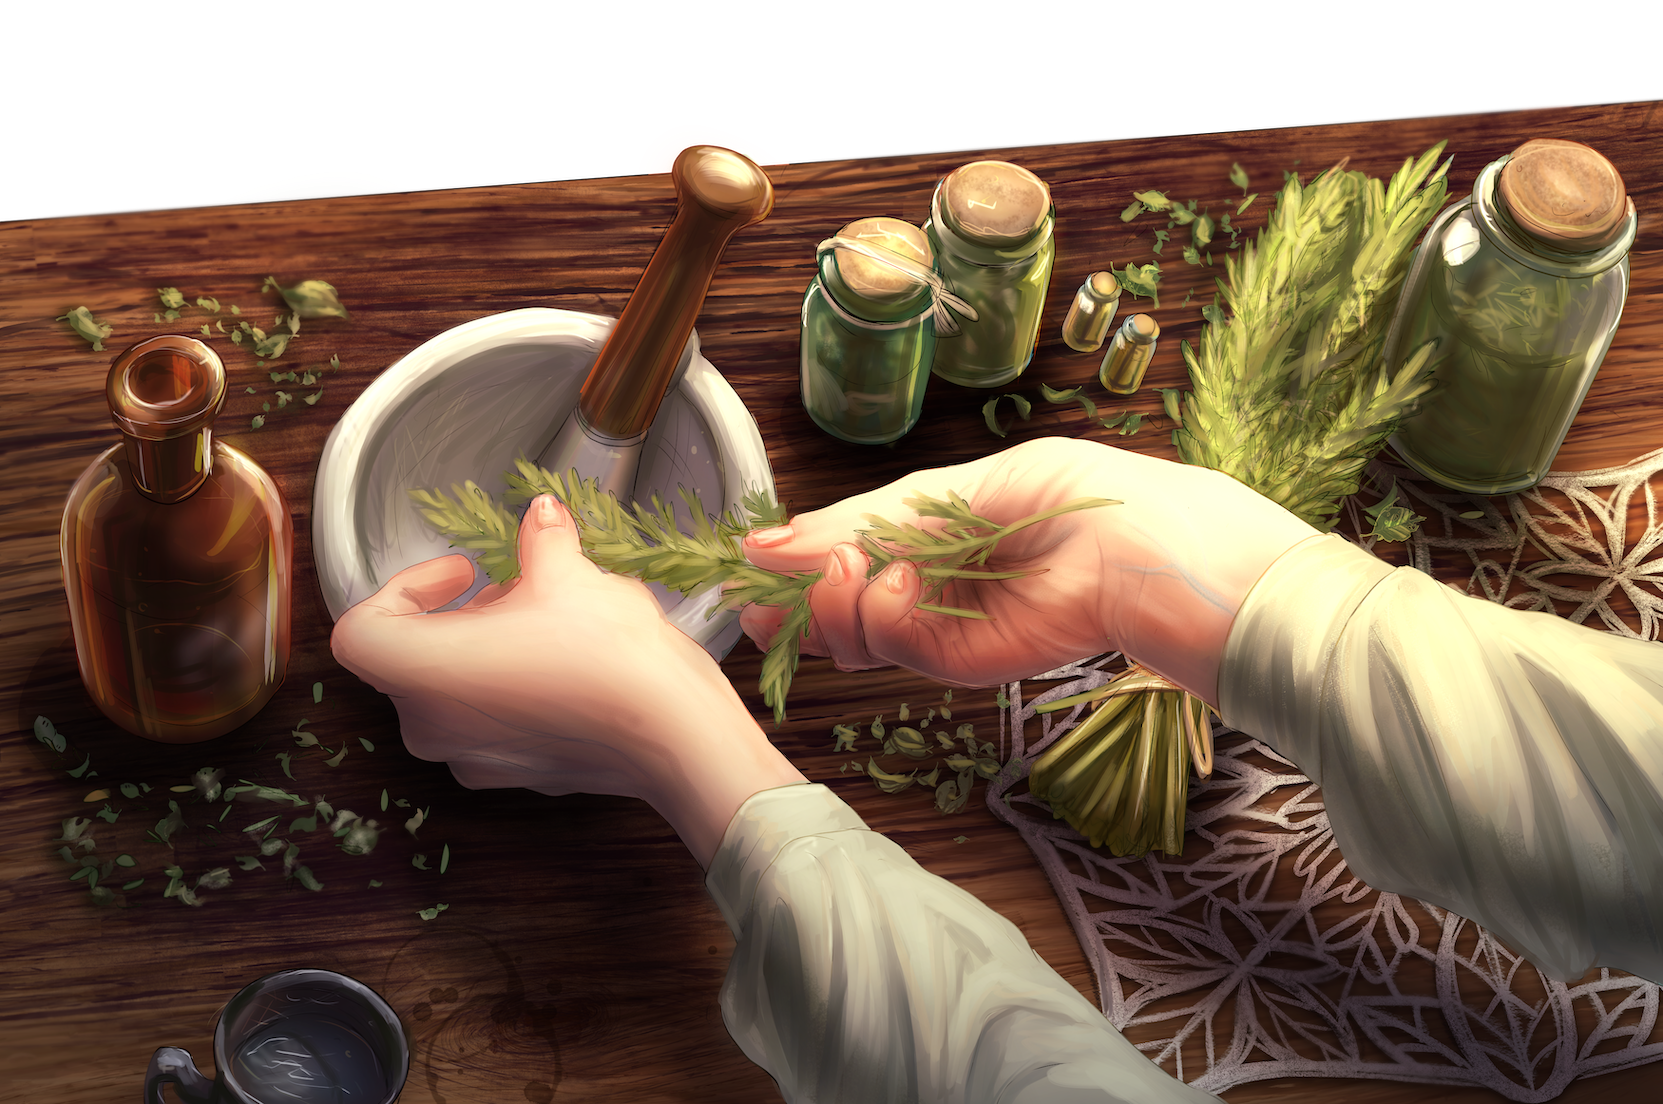 First-person perspective of hands adding plants to a mortar and pestle. Jars and bottles of all sizes sit haphazardly around the rough wood tabletop.